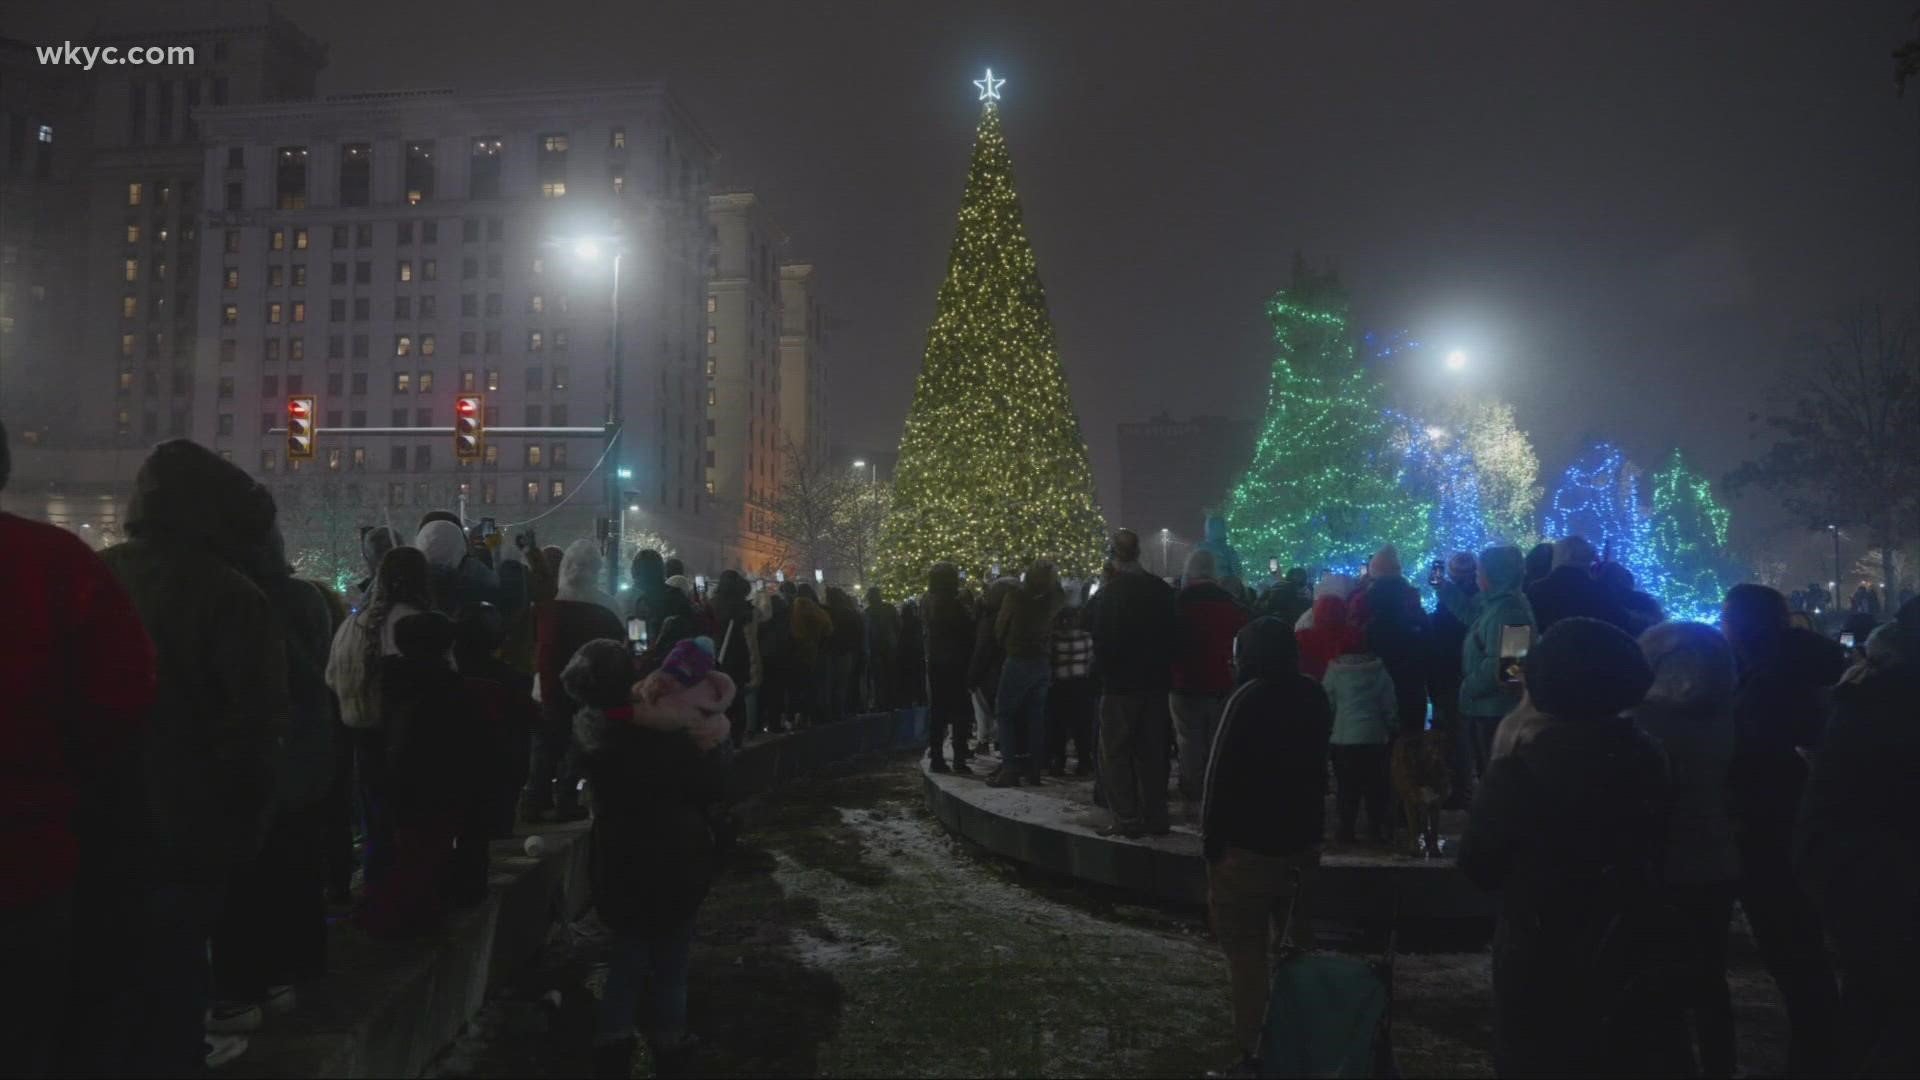 The holiday season has arrived! Winterfest began in Cleveland on Saturday night with the tree lighting ceremony in Public Square.